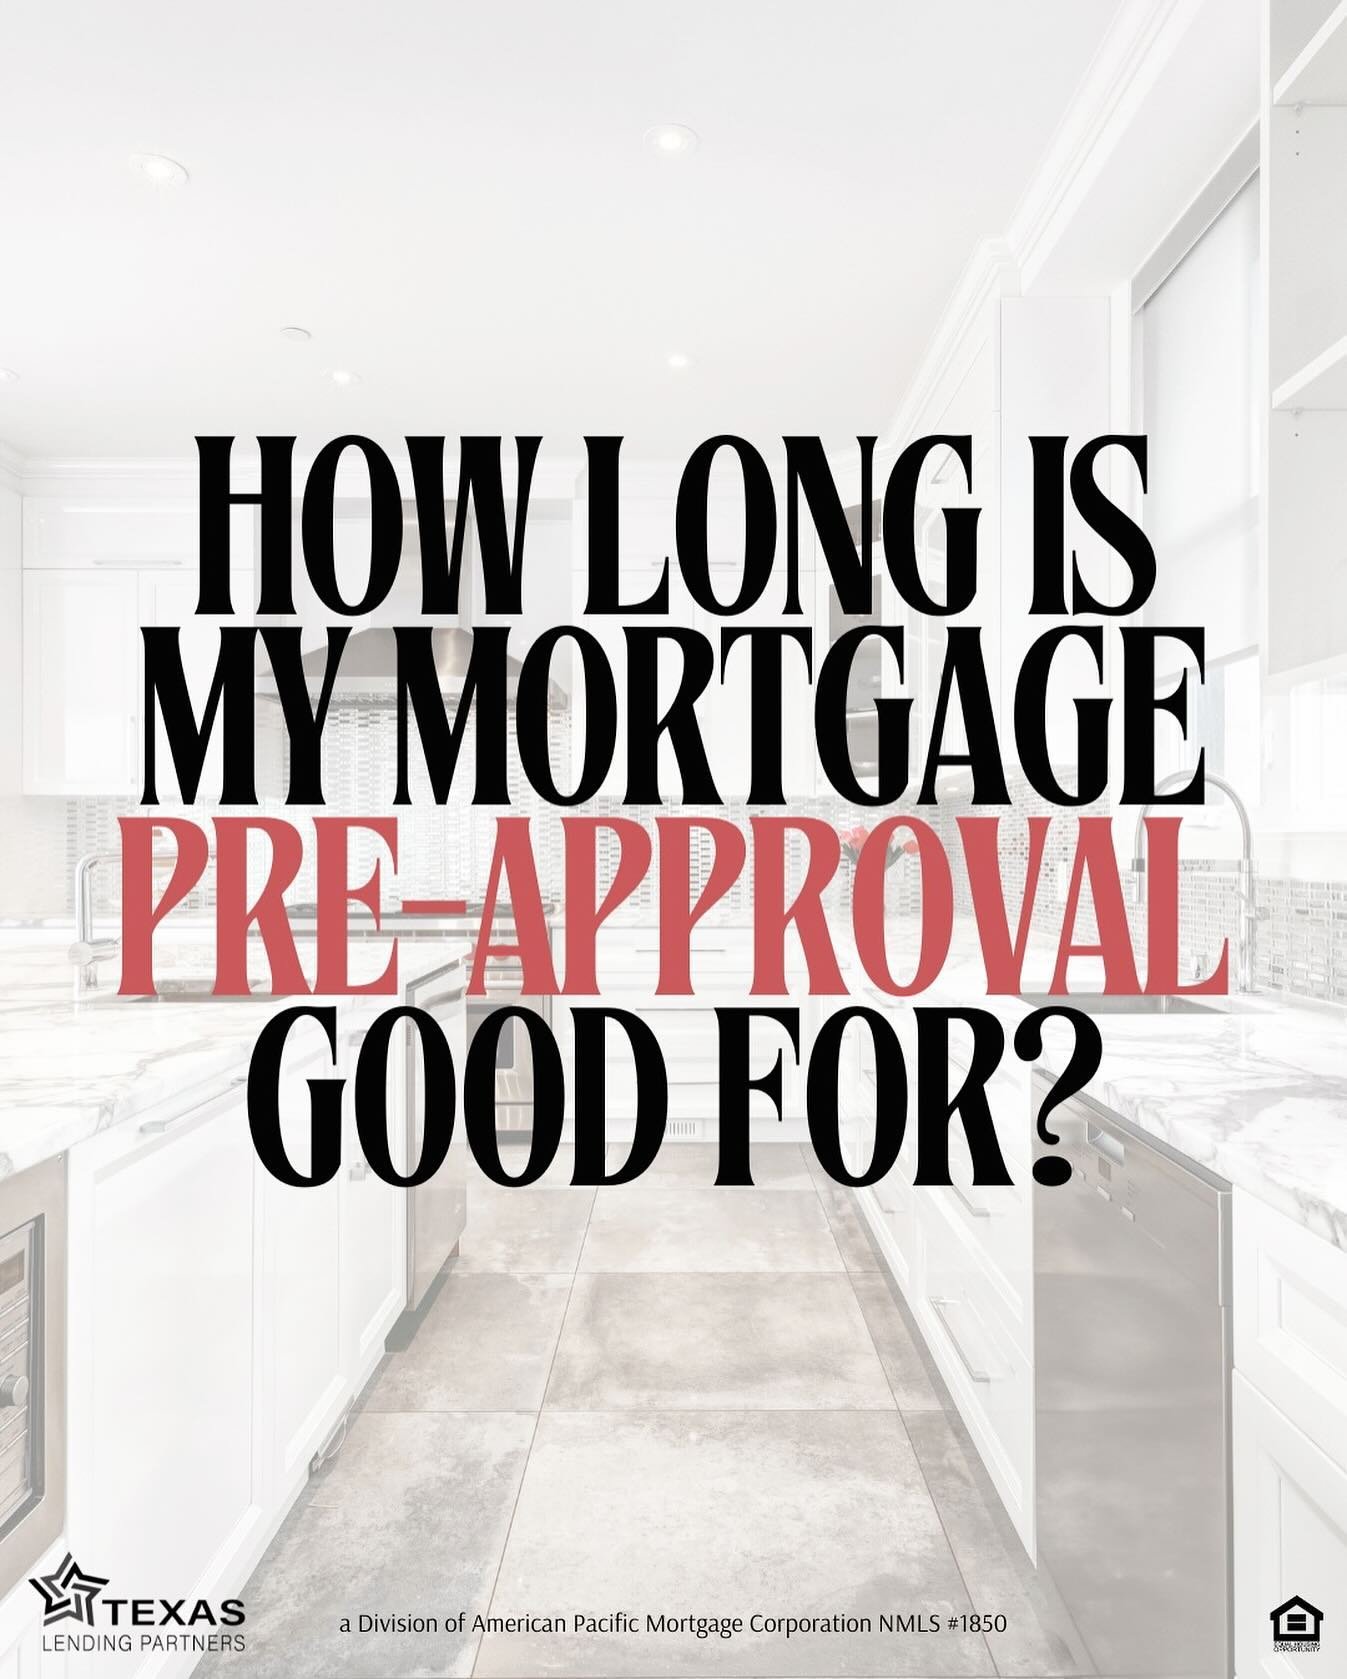 How long does mortgage pre-approval last? 🏡

Mortgage pre-approval, which provides sellers and their agents with assurance of your ability to purchase a home, usually remains valid for 60 days. 

While not obligatory for securing a home loan, it&rsq